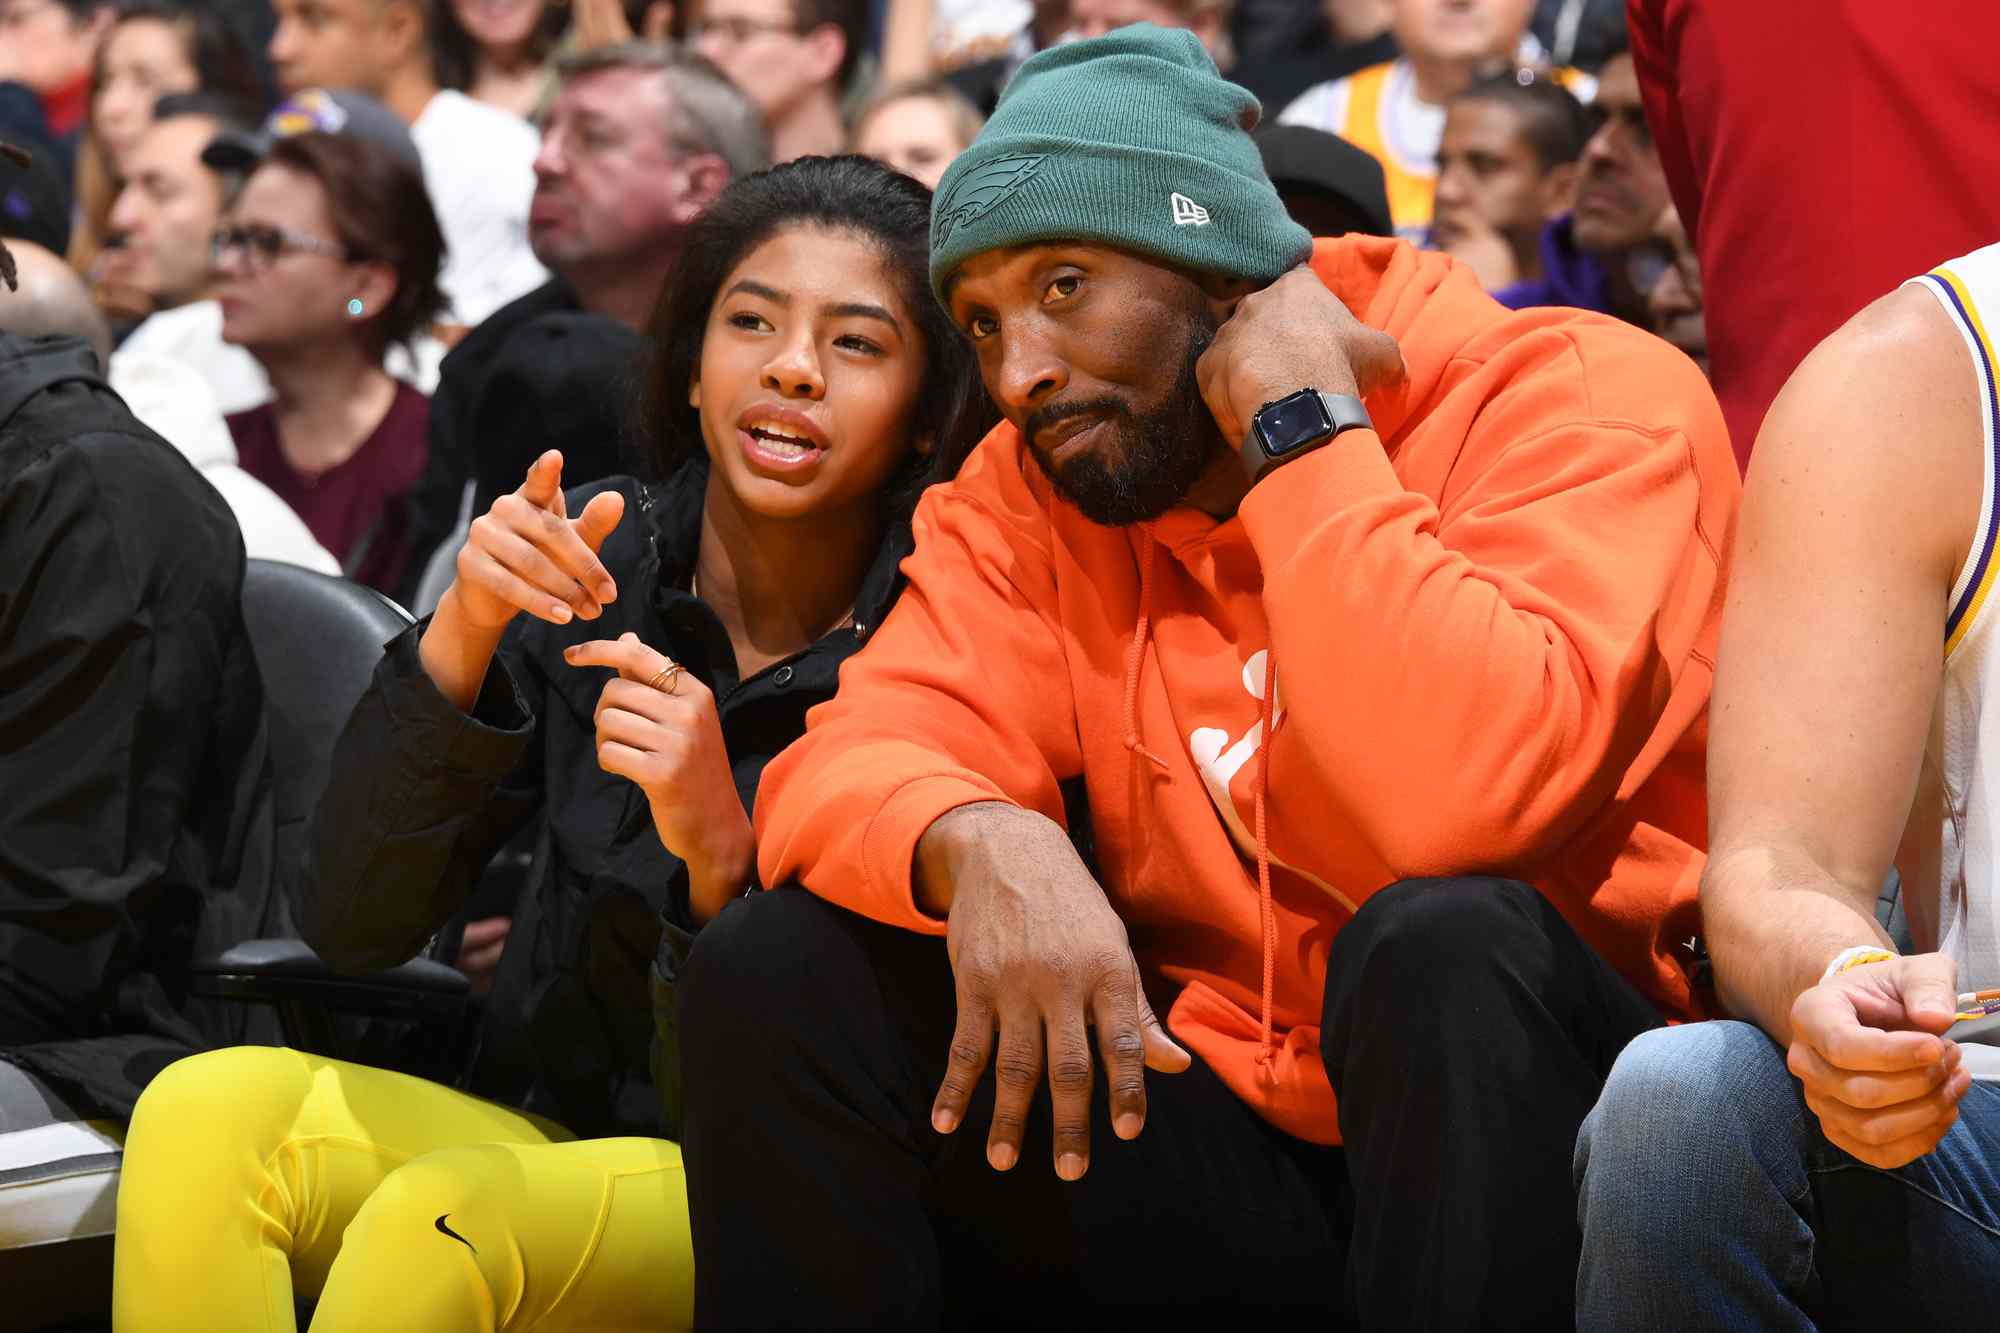 Kobe Bryant and Gianna Bryant attend the game between the Los Angeles Lakers and the Dallas Mavericks on December 29, 2019